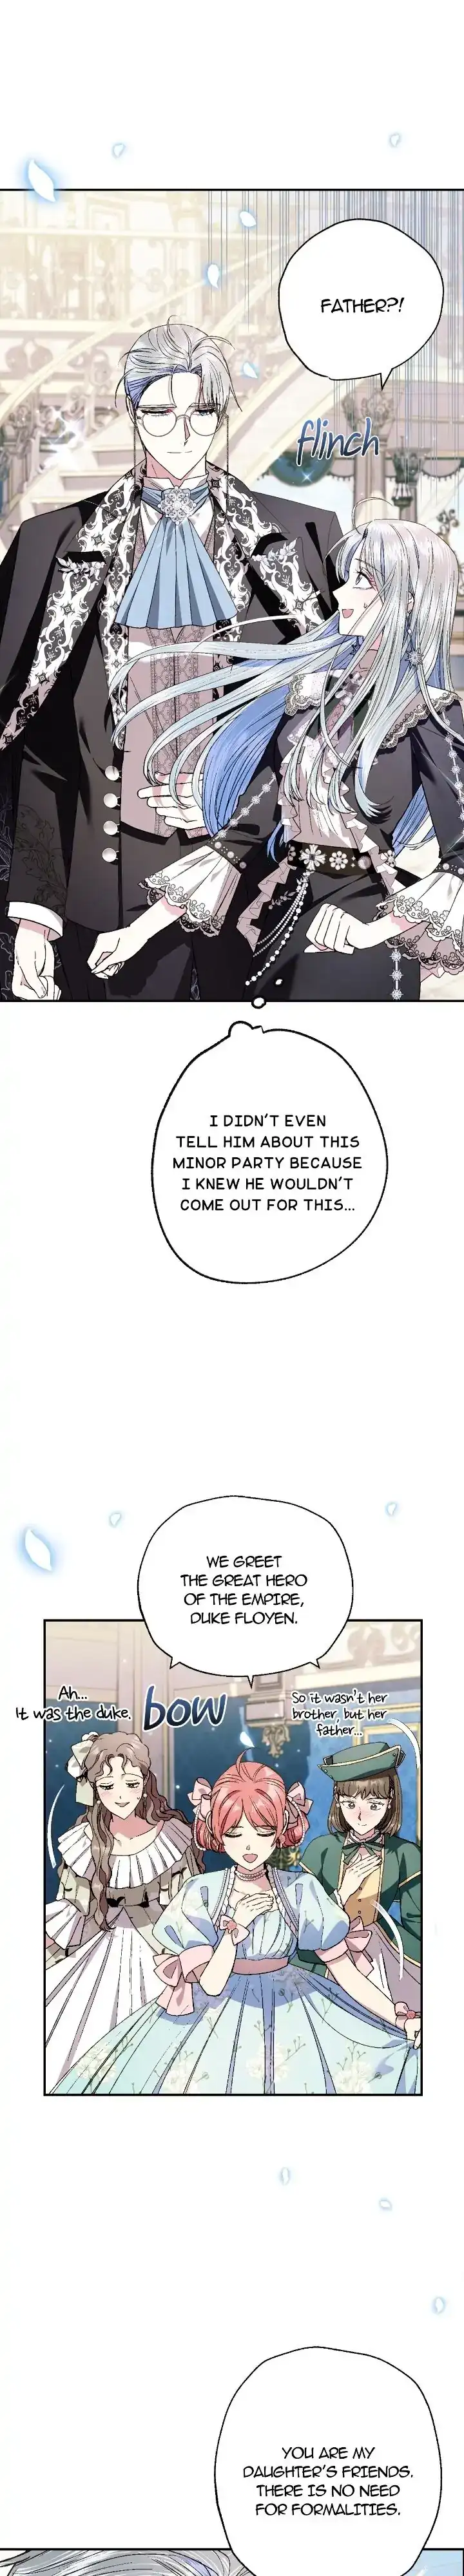 Father, I Don’t Want to Get Married!  - page 3